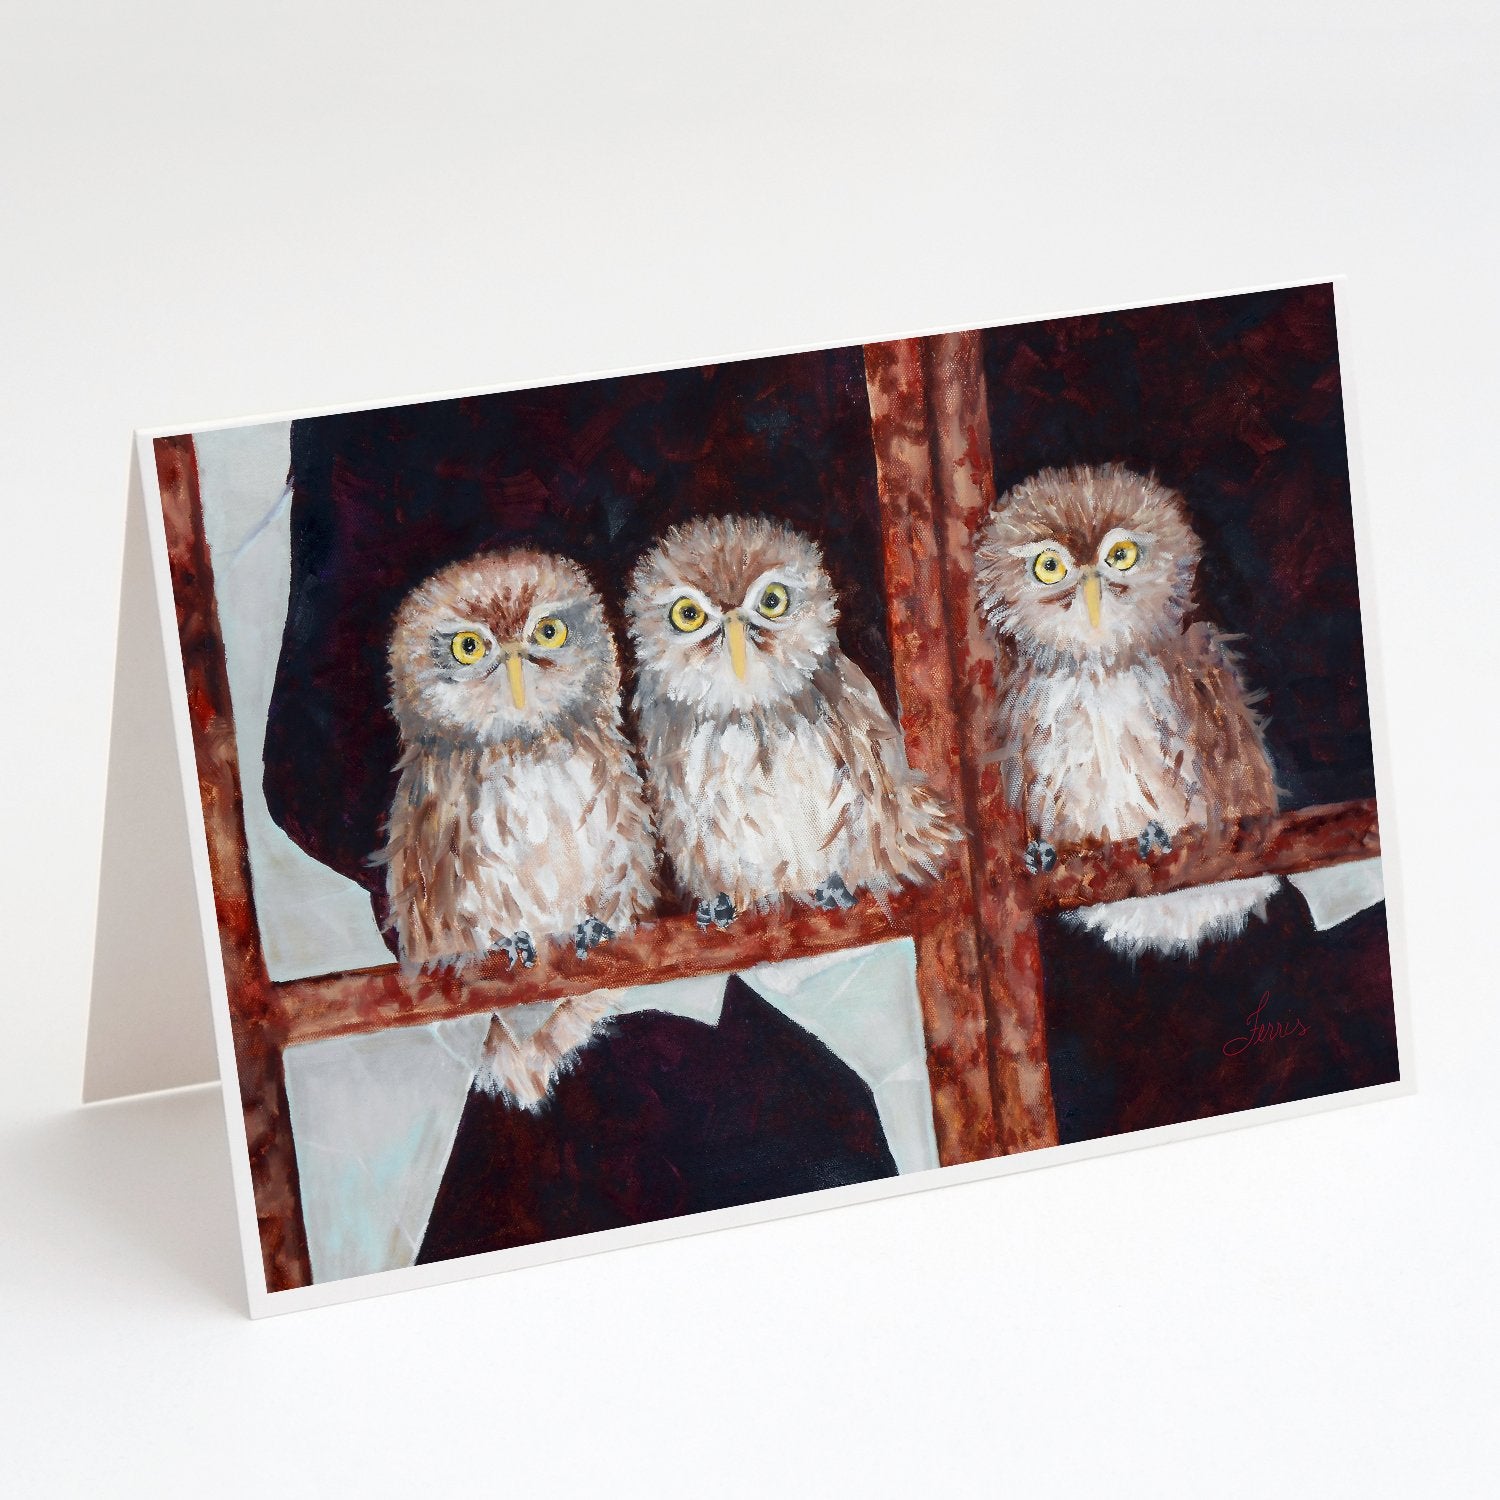 Buy this Owls by Ferris Hotard Greeting Cards and Envelopes Pack of 8